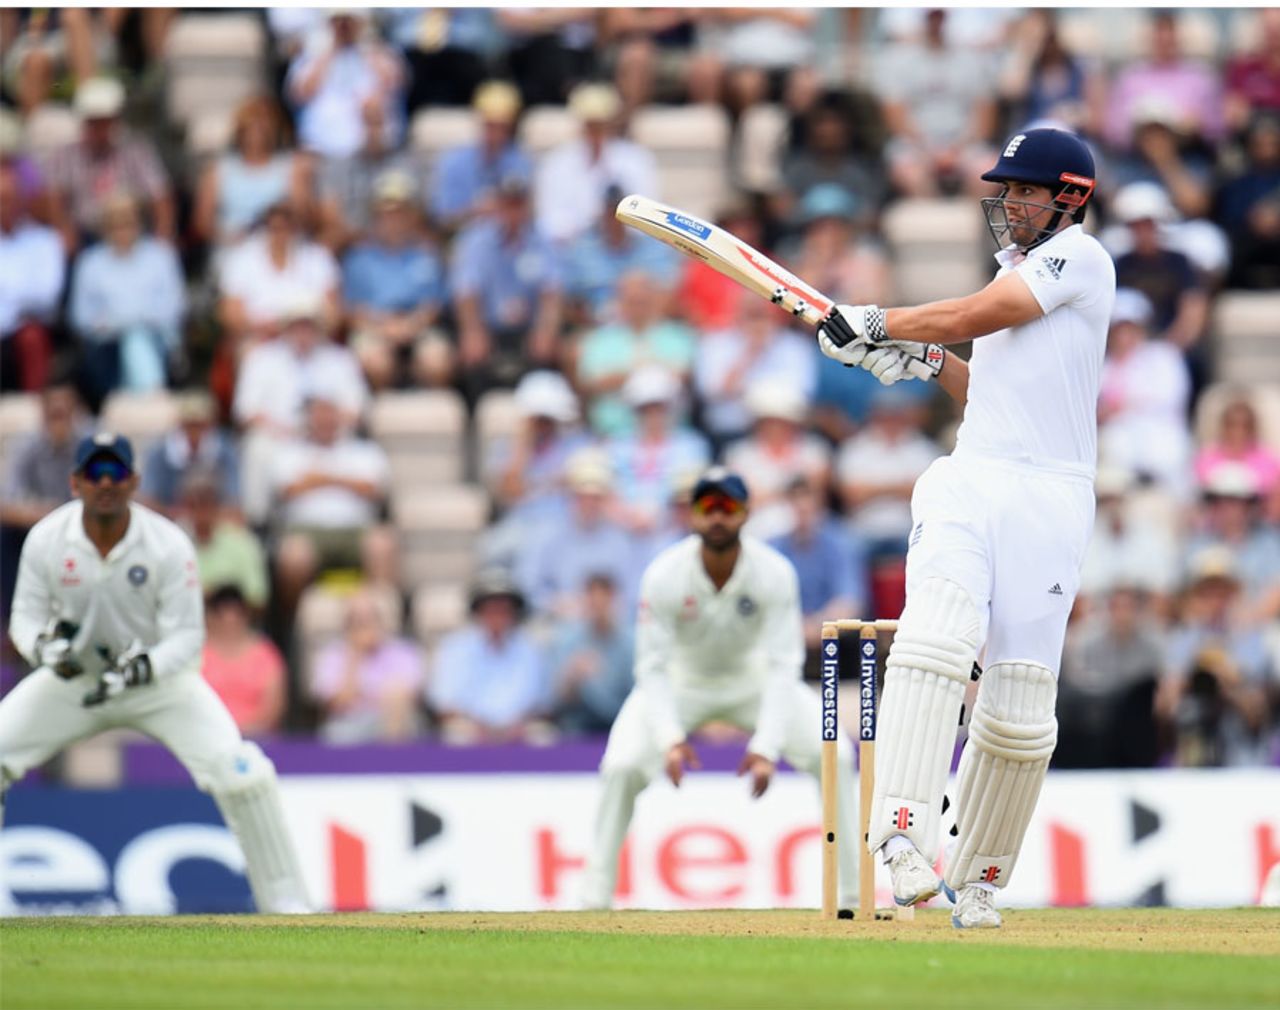 Alastair Cook made his first fifty in 10 innings, England v India, 3rd Investec Test, Ageas Bowl, 1st day, July 27, 2014